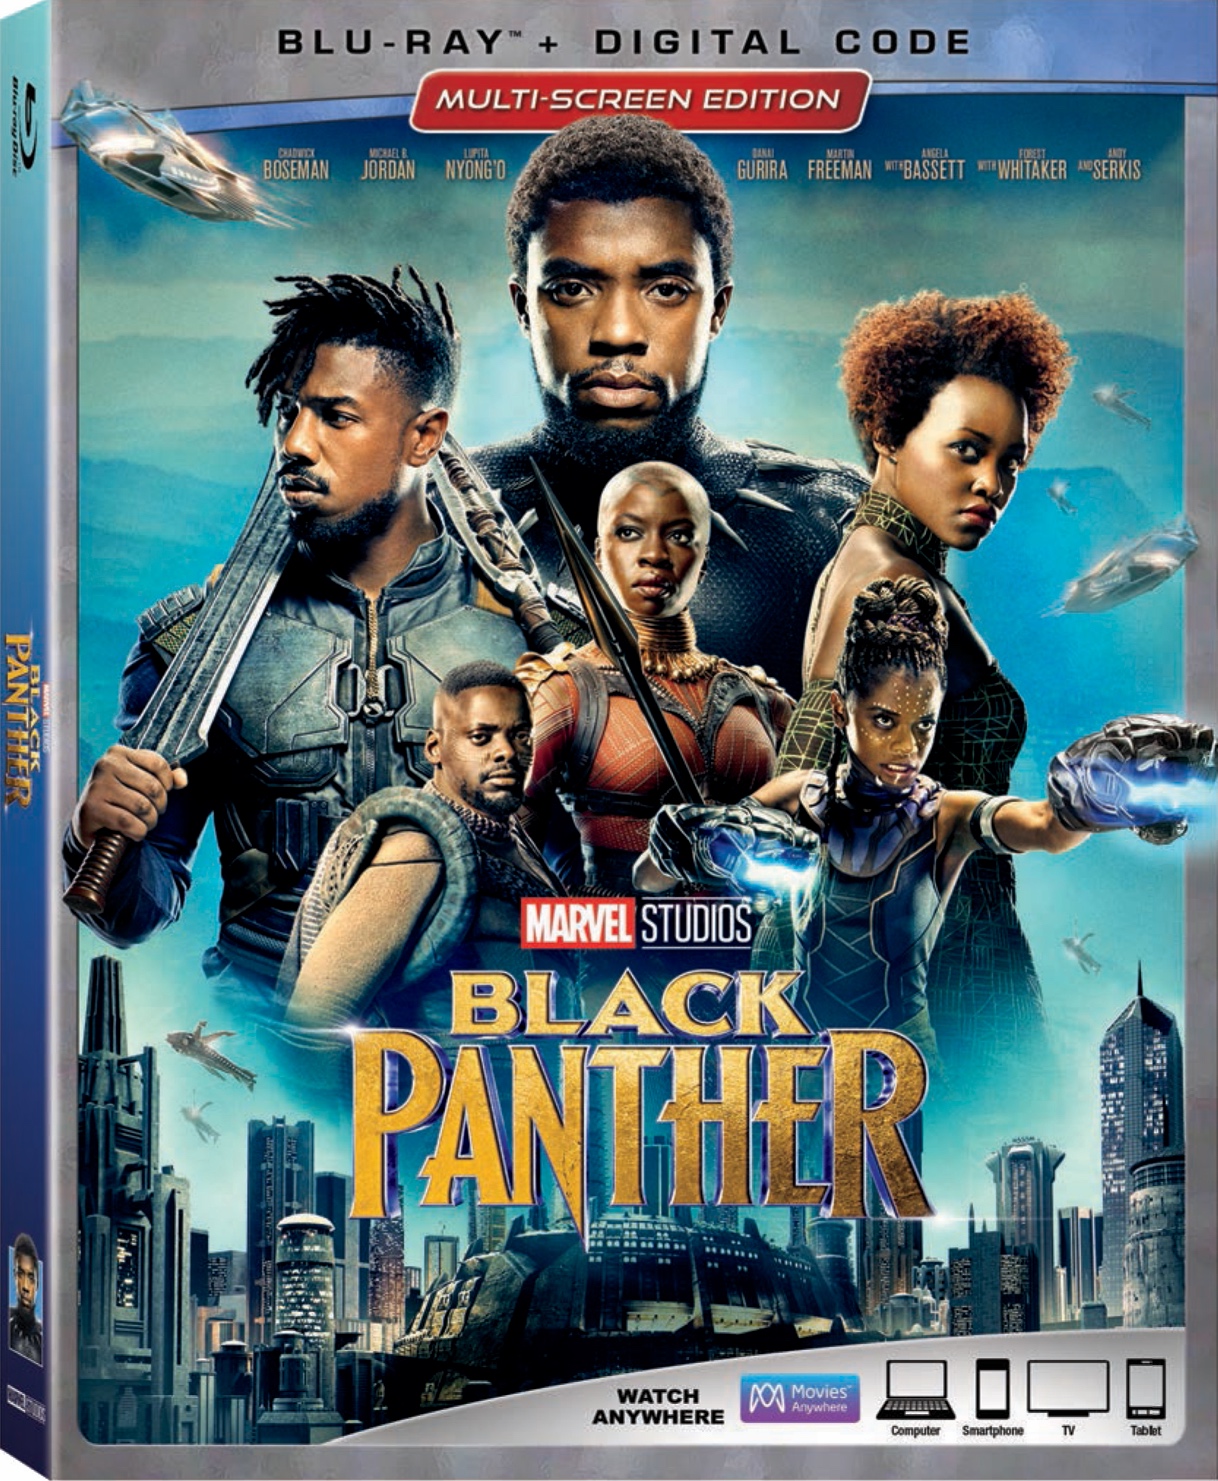 Black Panther Movie from Marvel Studios